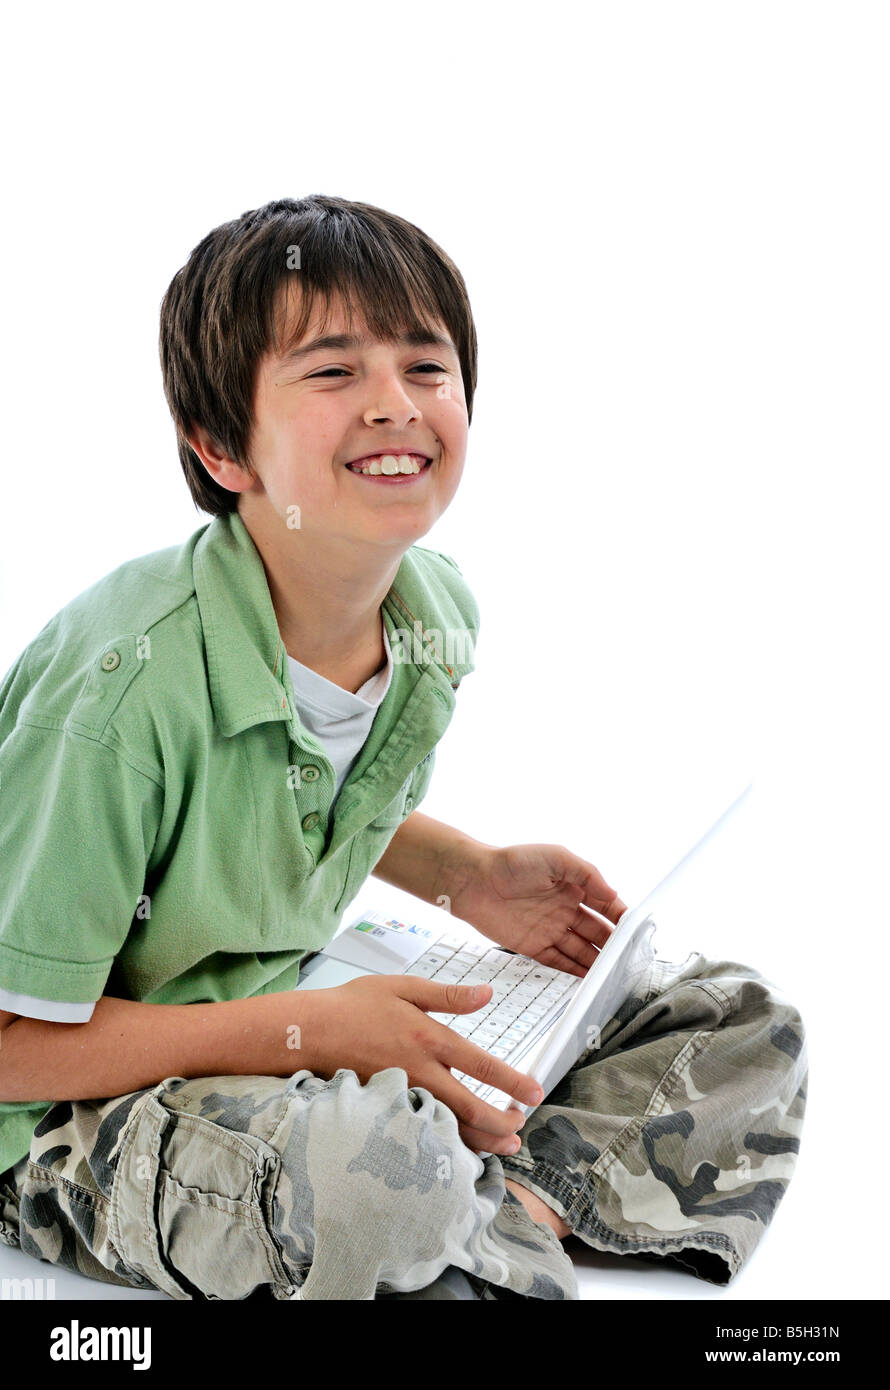 Young boy using an ASUS Eee PC laptop and smiling Stock Photo